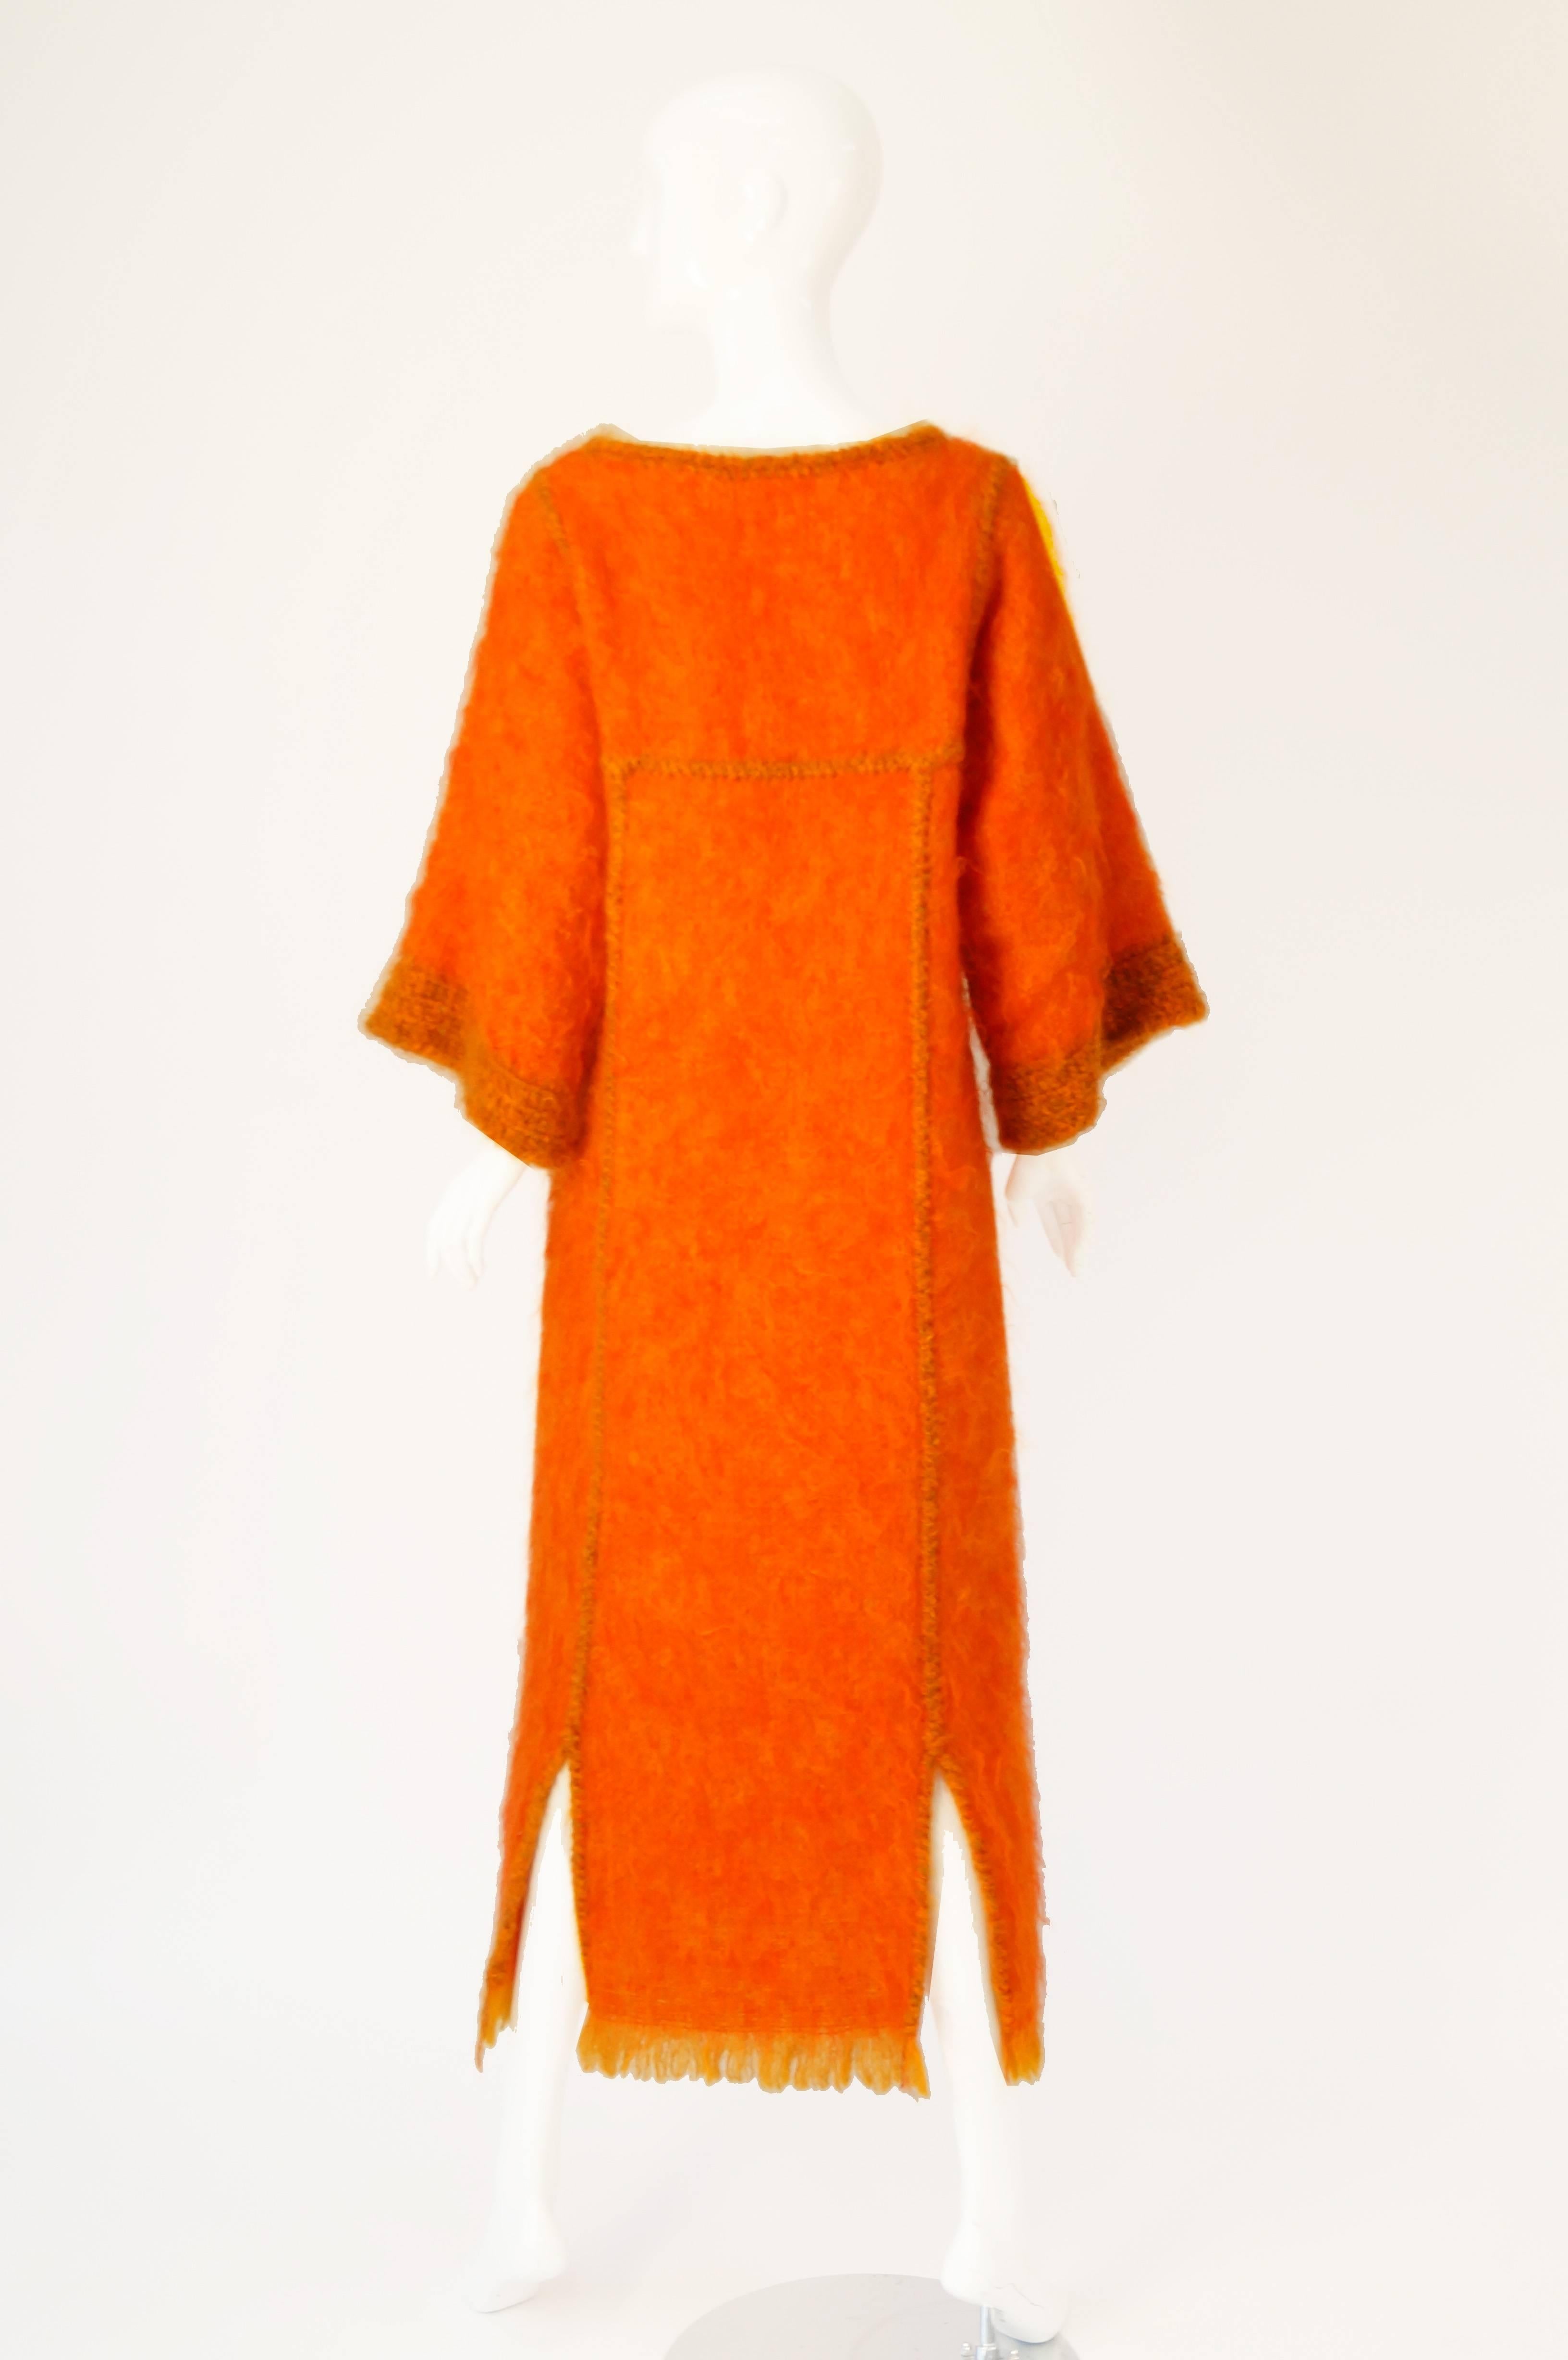 Add a little color to your winter weather wardrobe with this great tangerine mohair caftan/dress by Atelier Jacque d'Aubres.  Known for her handmade clothing Mme d'Aubres has created a beautiful piece of art with this bright creation.

The tangerine